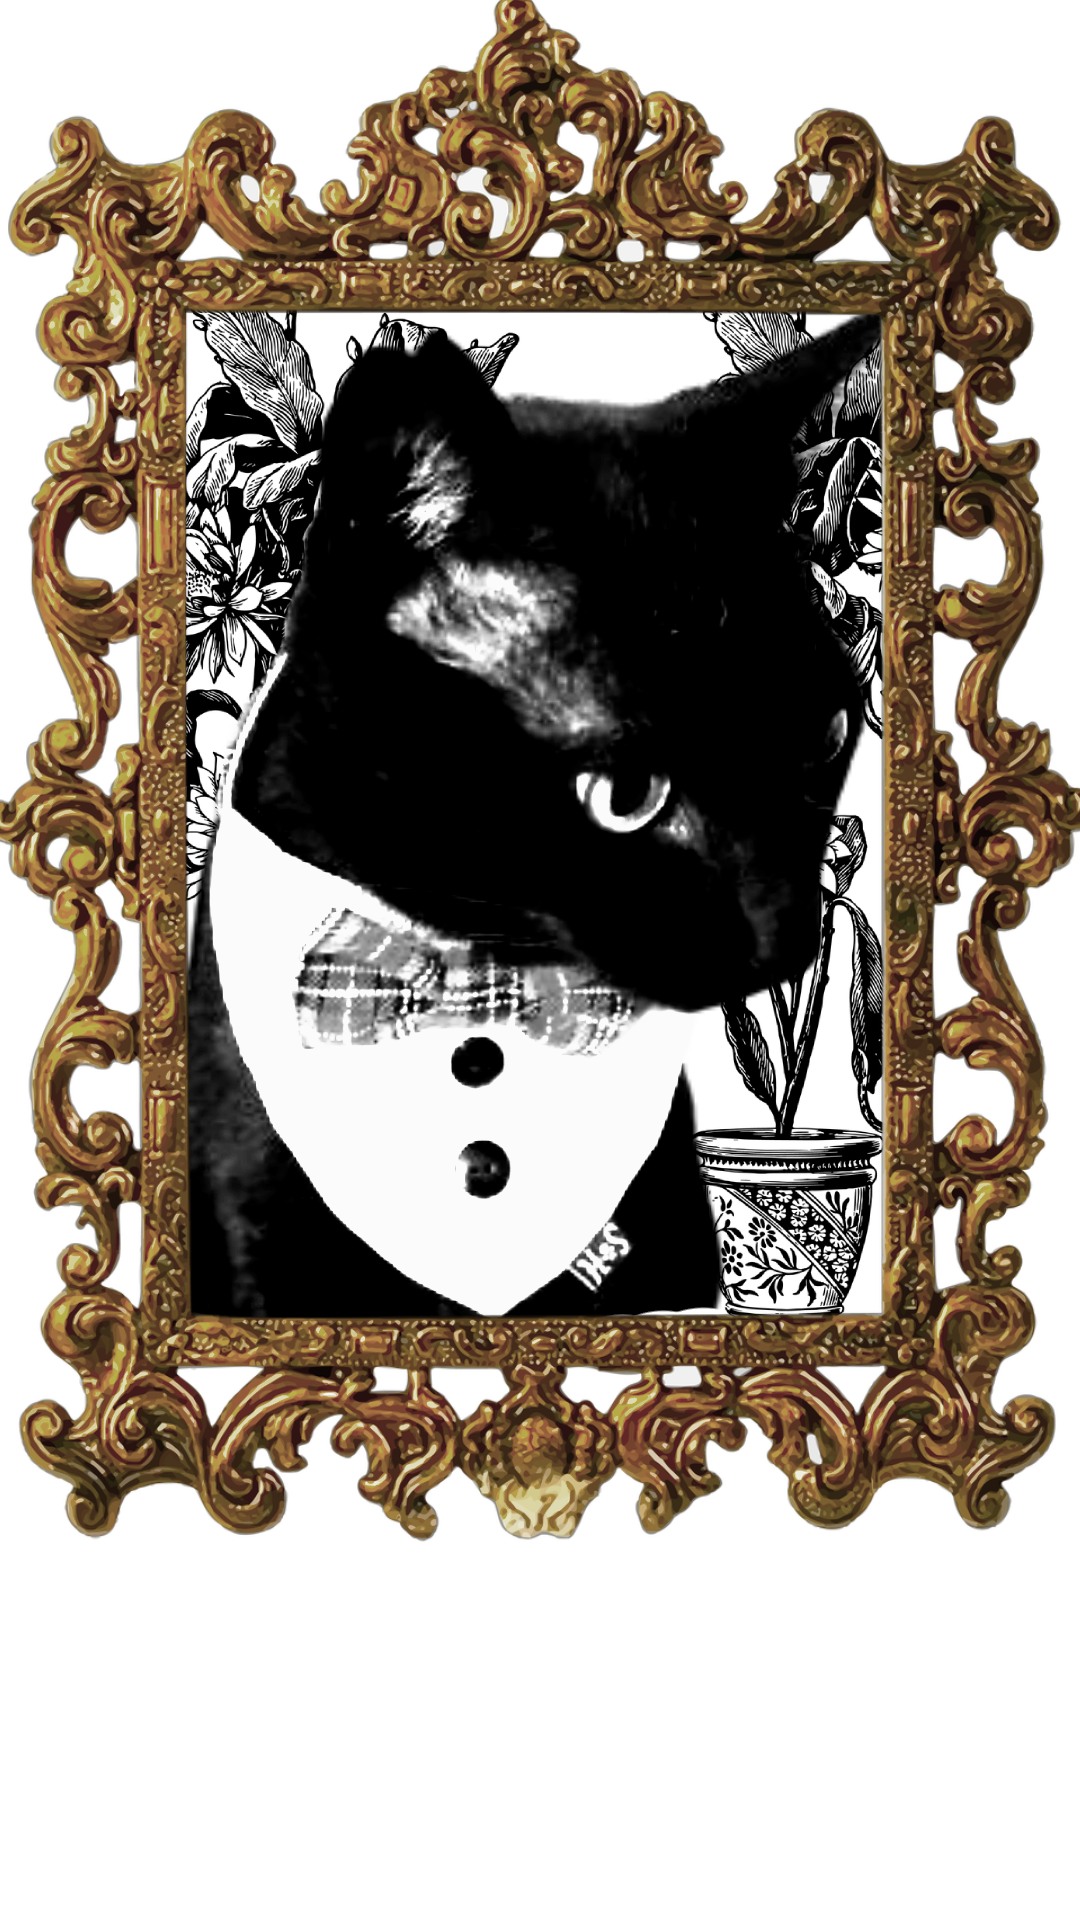 black and white image of black cat with bow tie framed by a gold antique frame